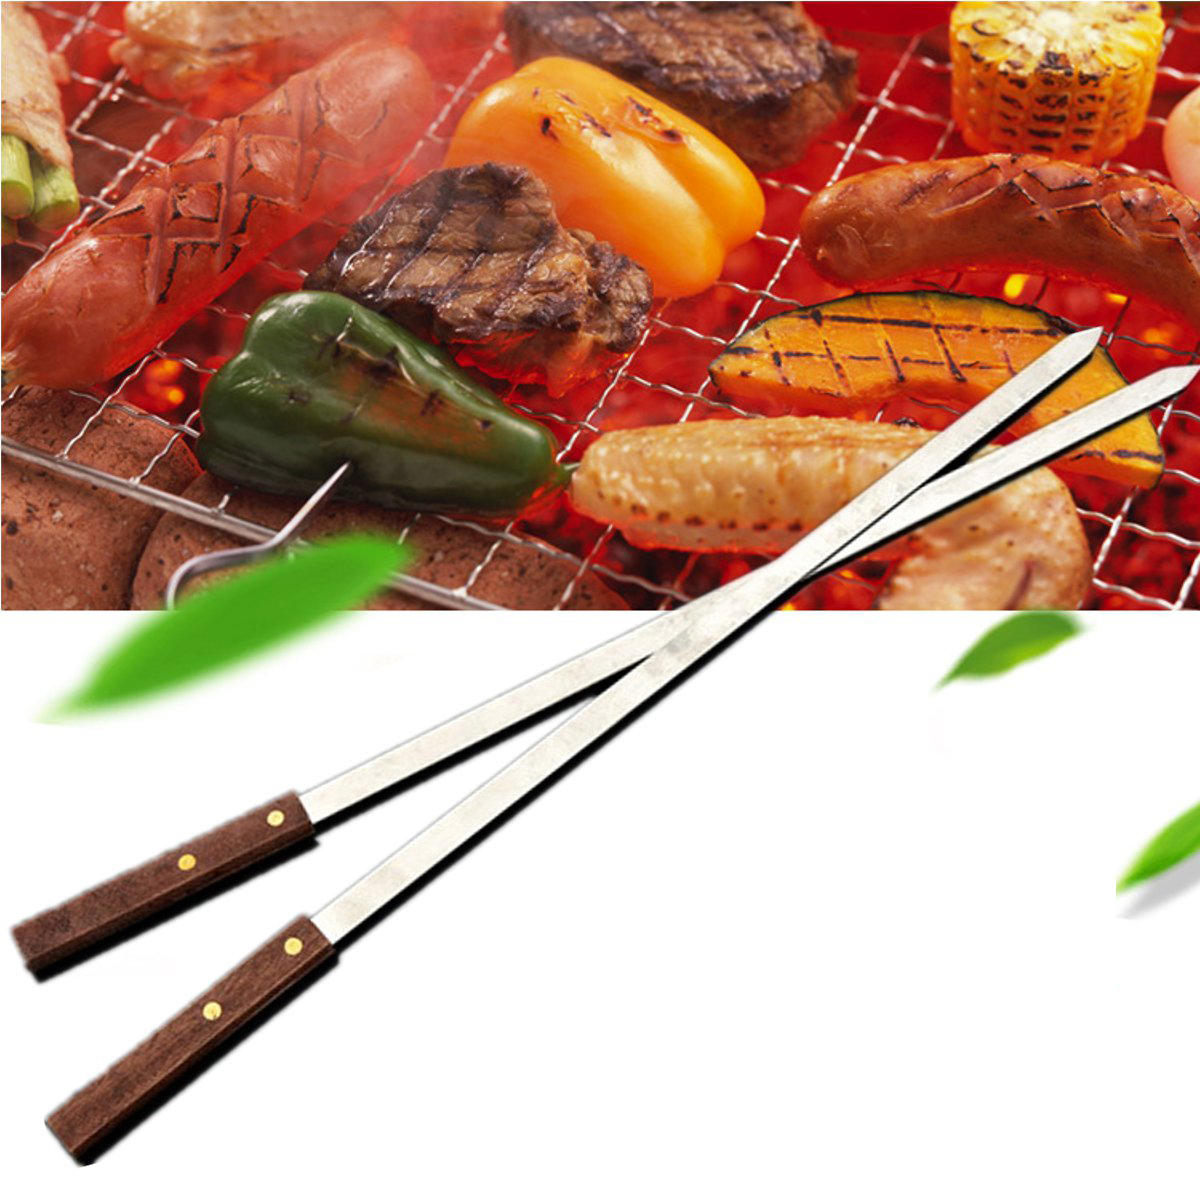 1Pcs 54cm Long Stainless Steel BBQ Barbecue Skewer Wood Handle Grill Roasting Stick Fork